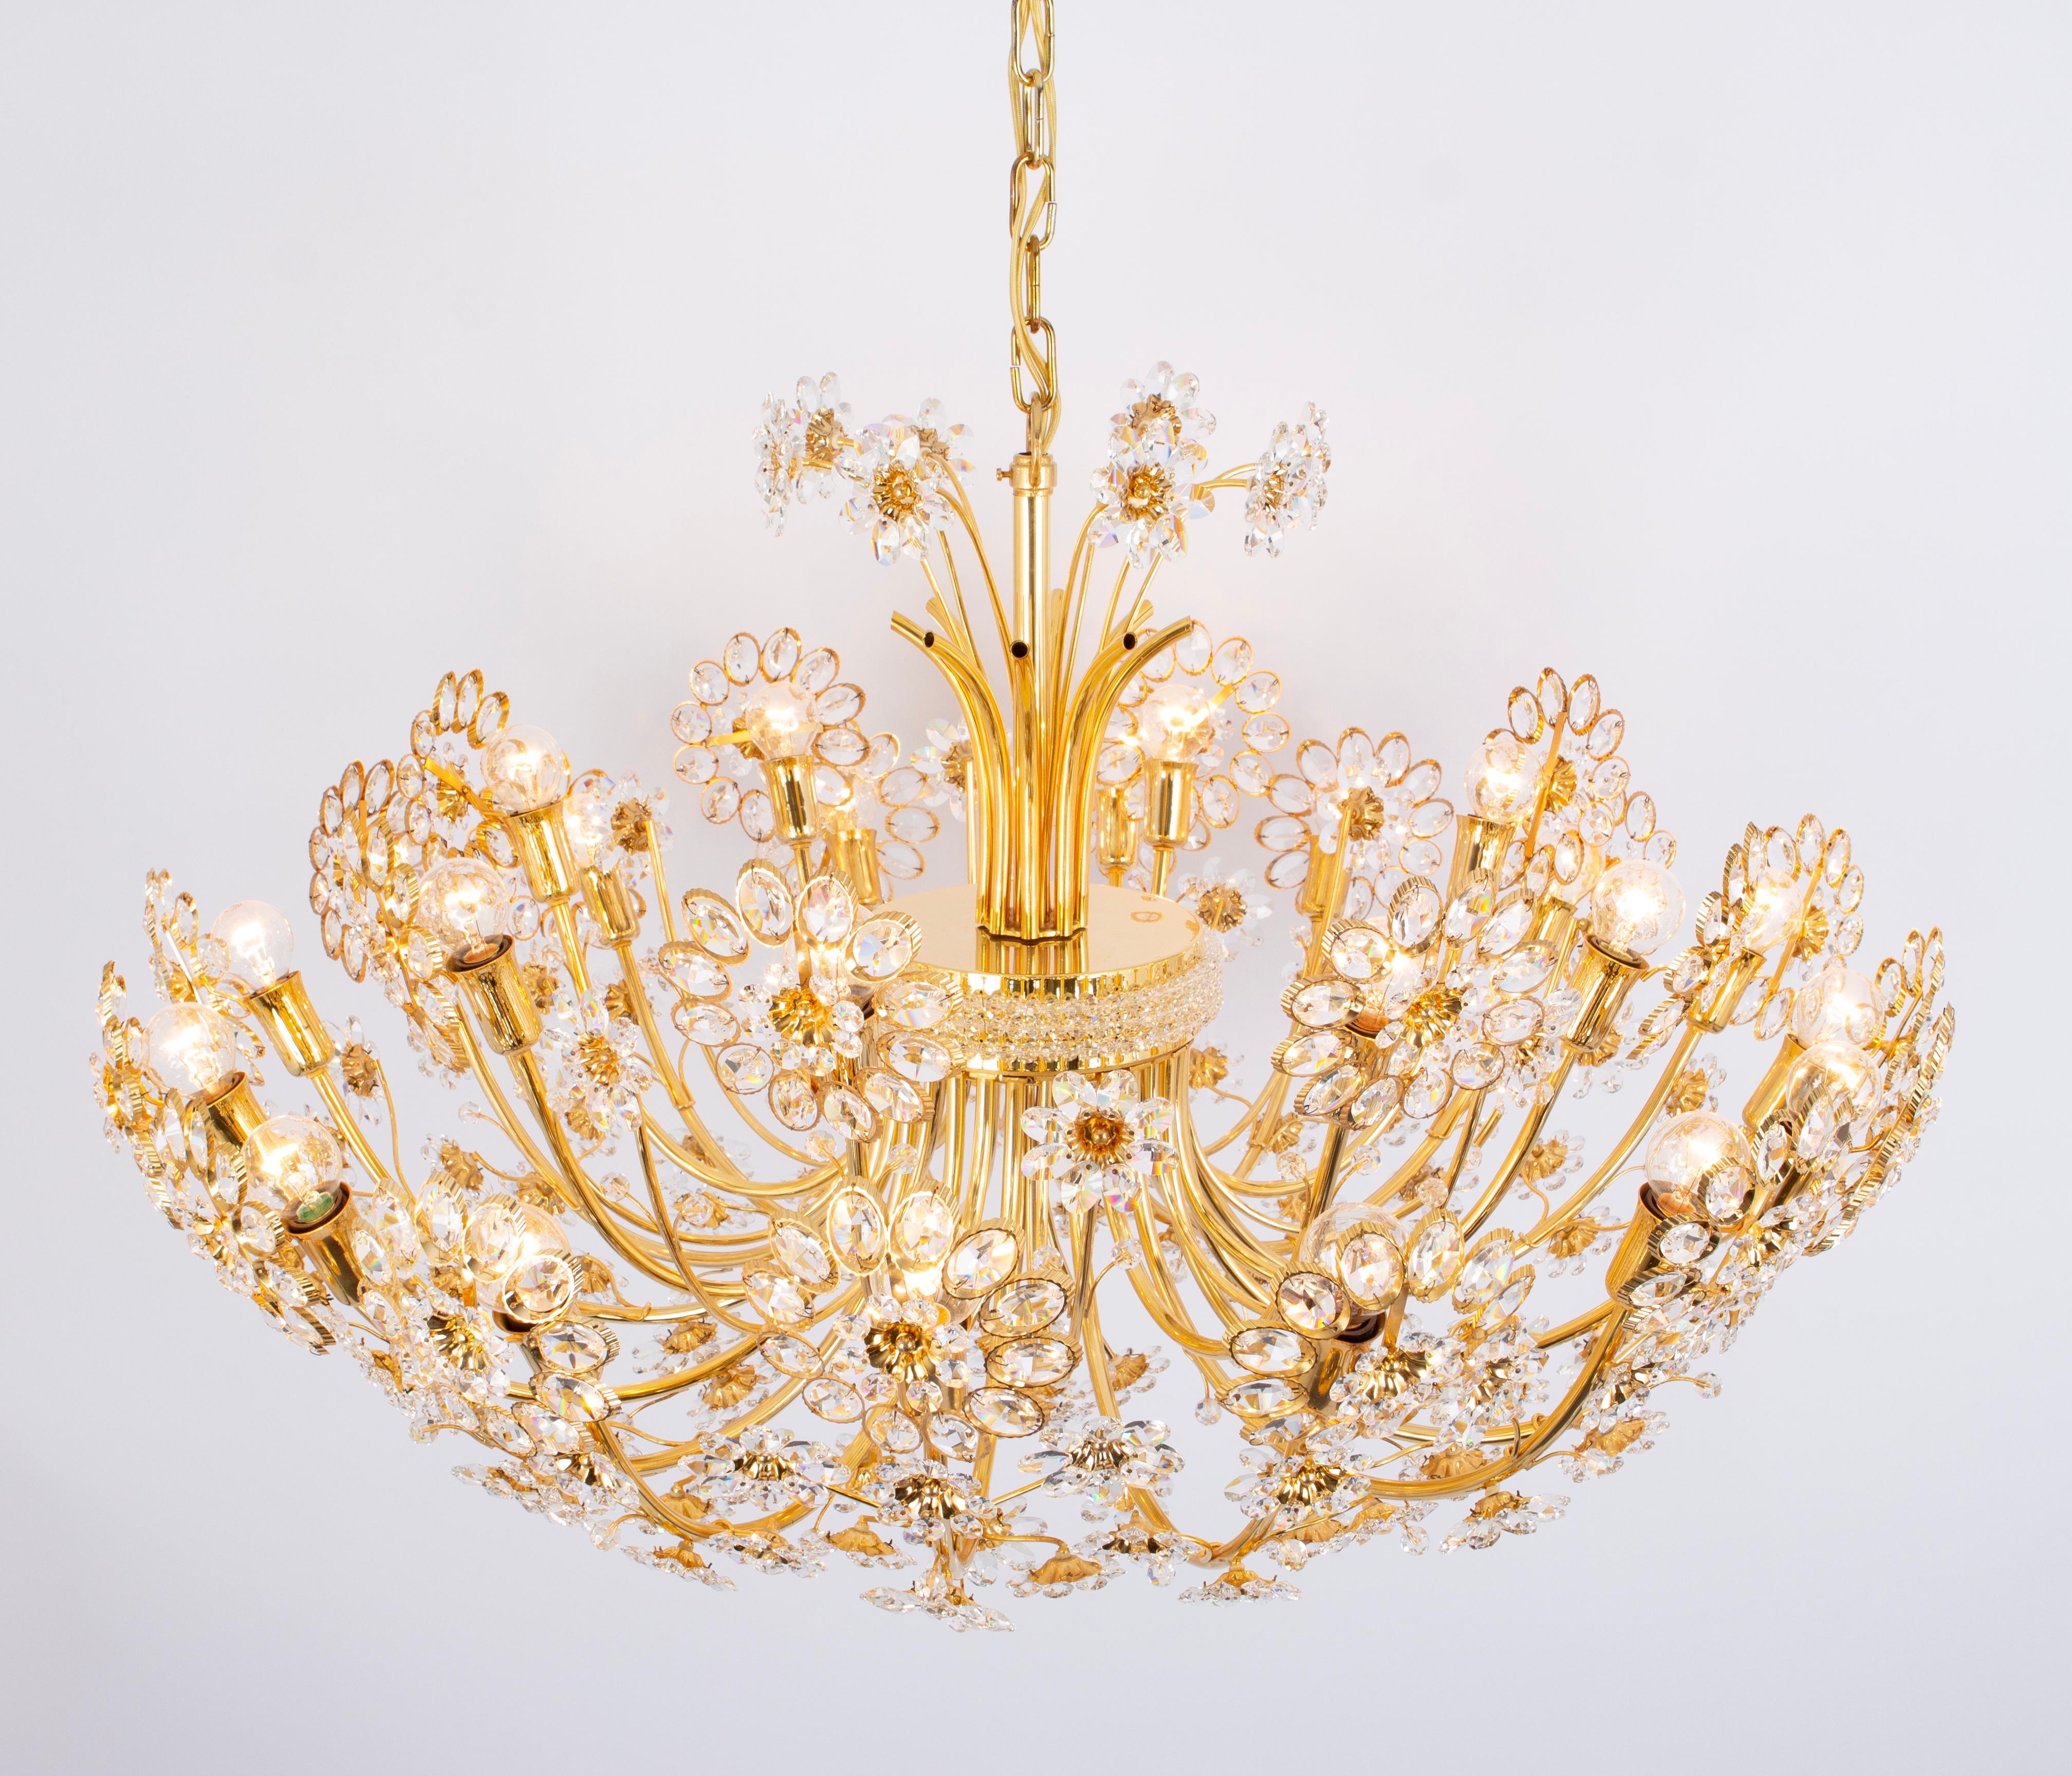 Huge Delicate Gilt Brass and Crystal Flower Chandelier by Palwa, Germany, 1970s For Sale 4